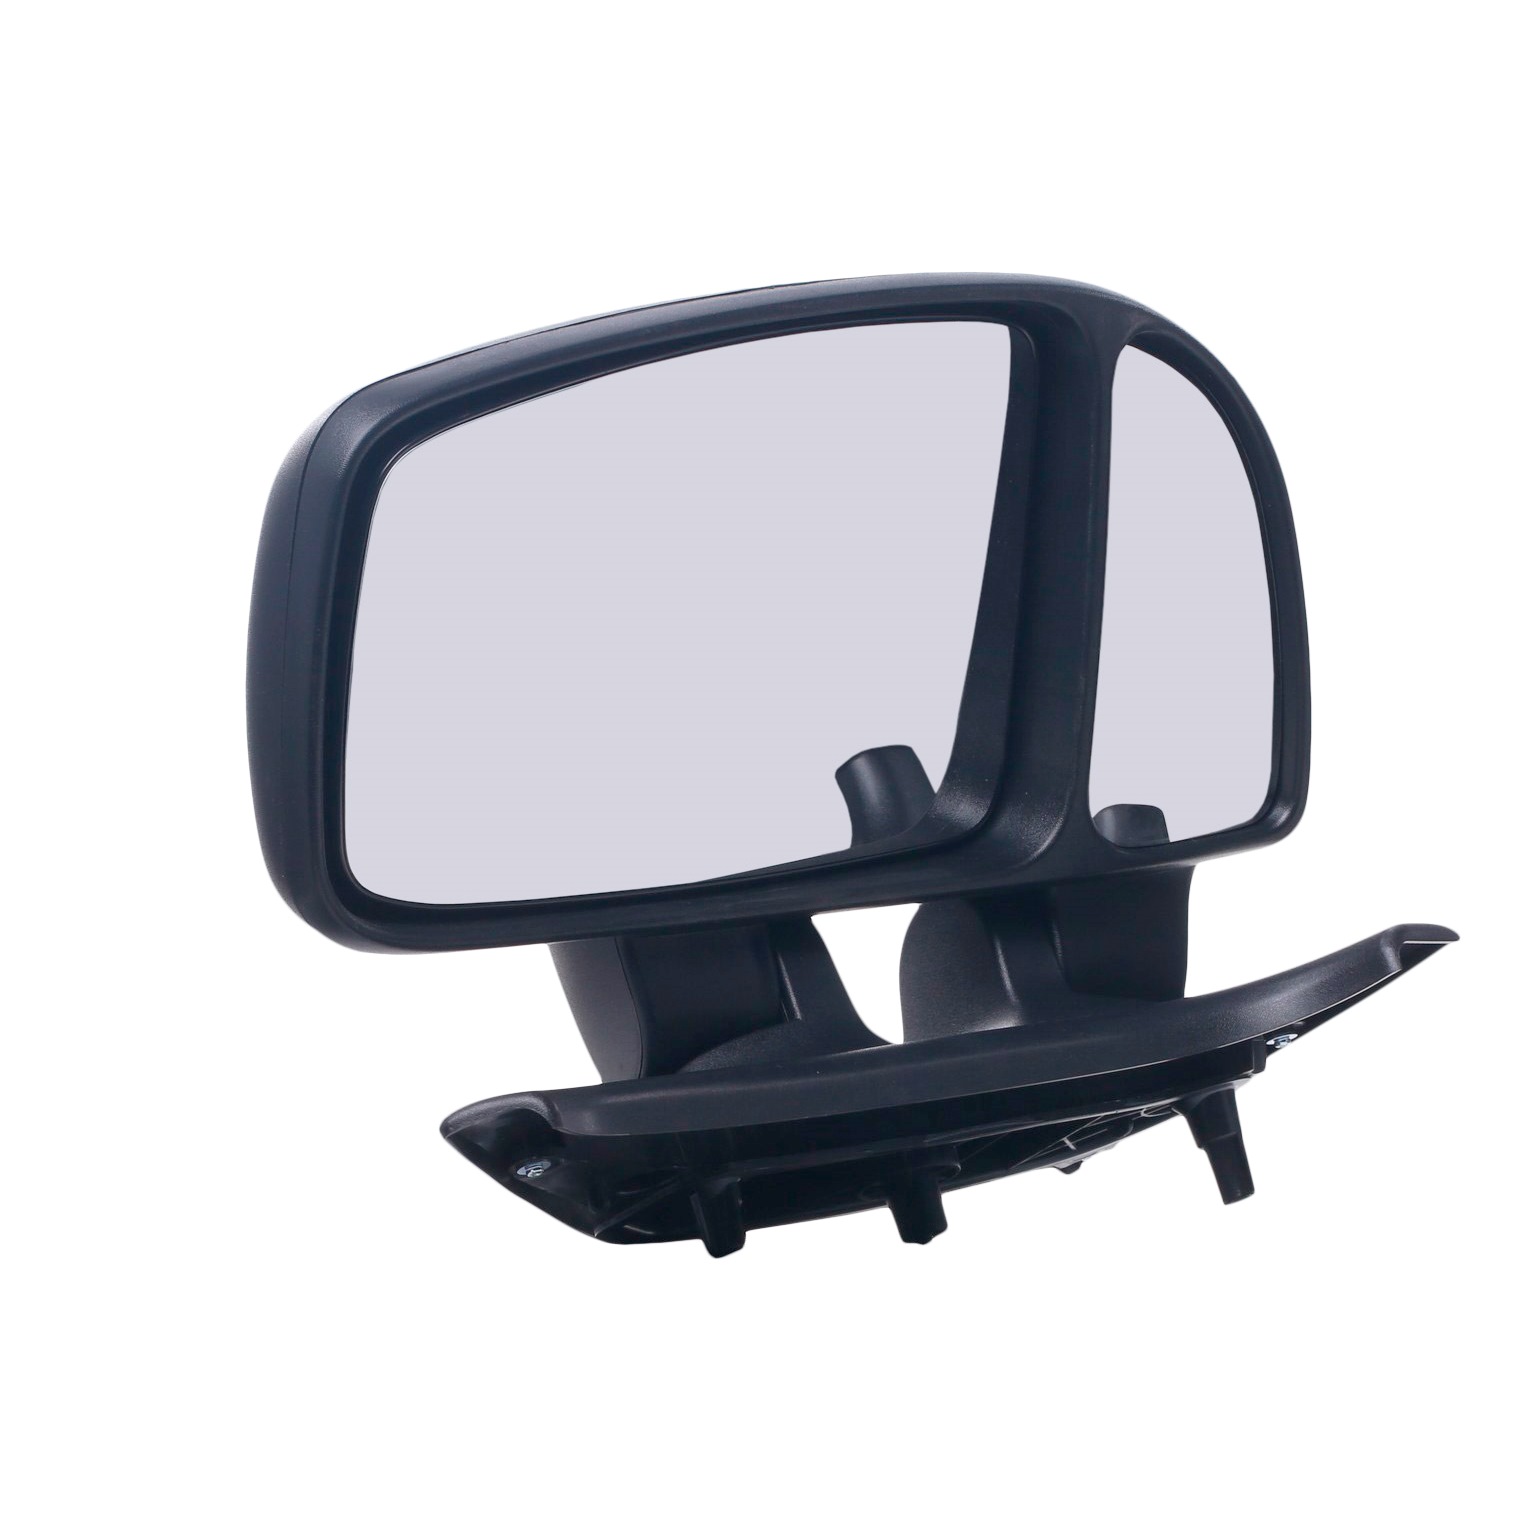 RIDEX 50O0263 Wing mirror Right, black, Rough, Convex, with wide angle mirror, Complete Mirror, for manual mirror adjustment, Short mirror arm